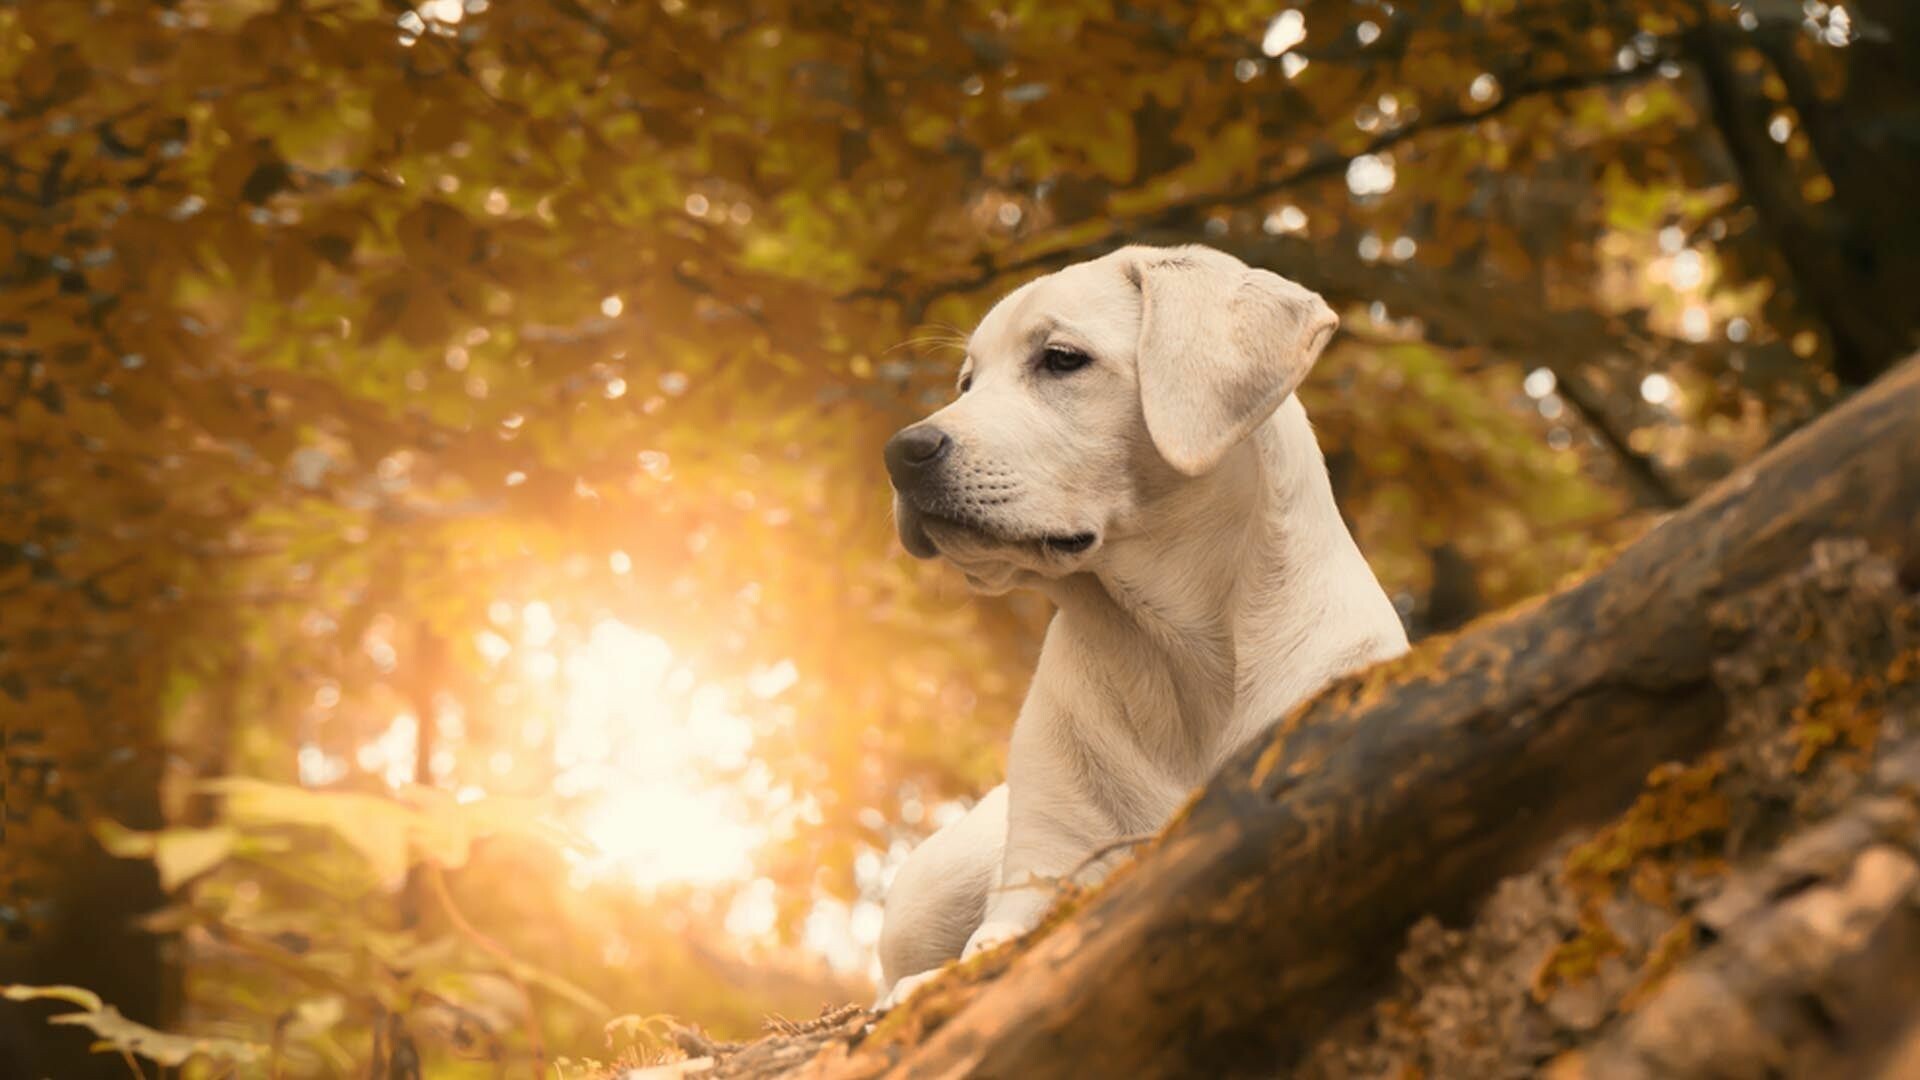 Labrador Retriever: Can be either show or sporting dogs, Mammal. 1920x1080 Full HD Wallpaper.